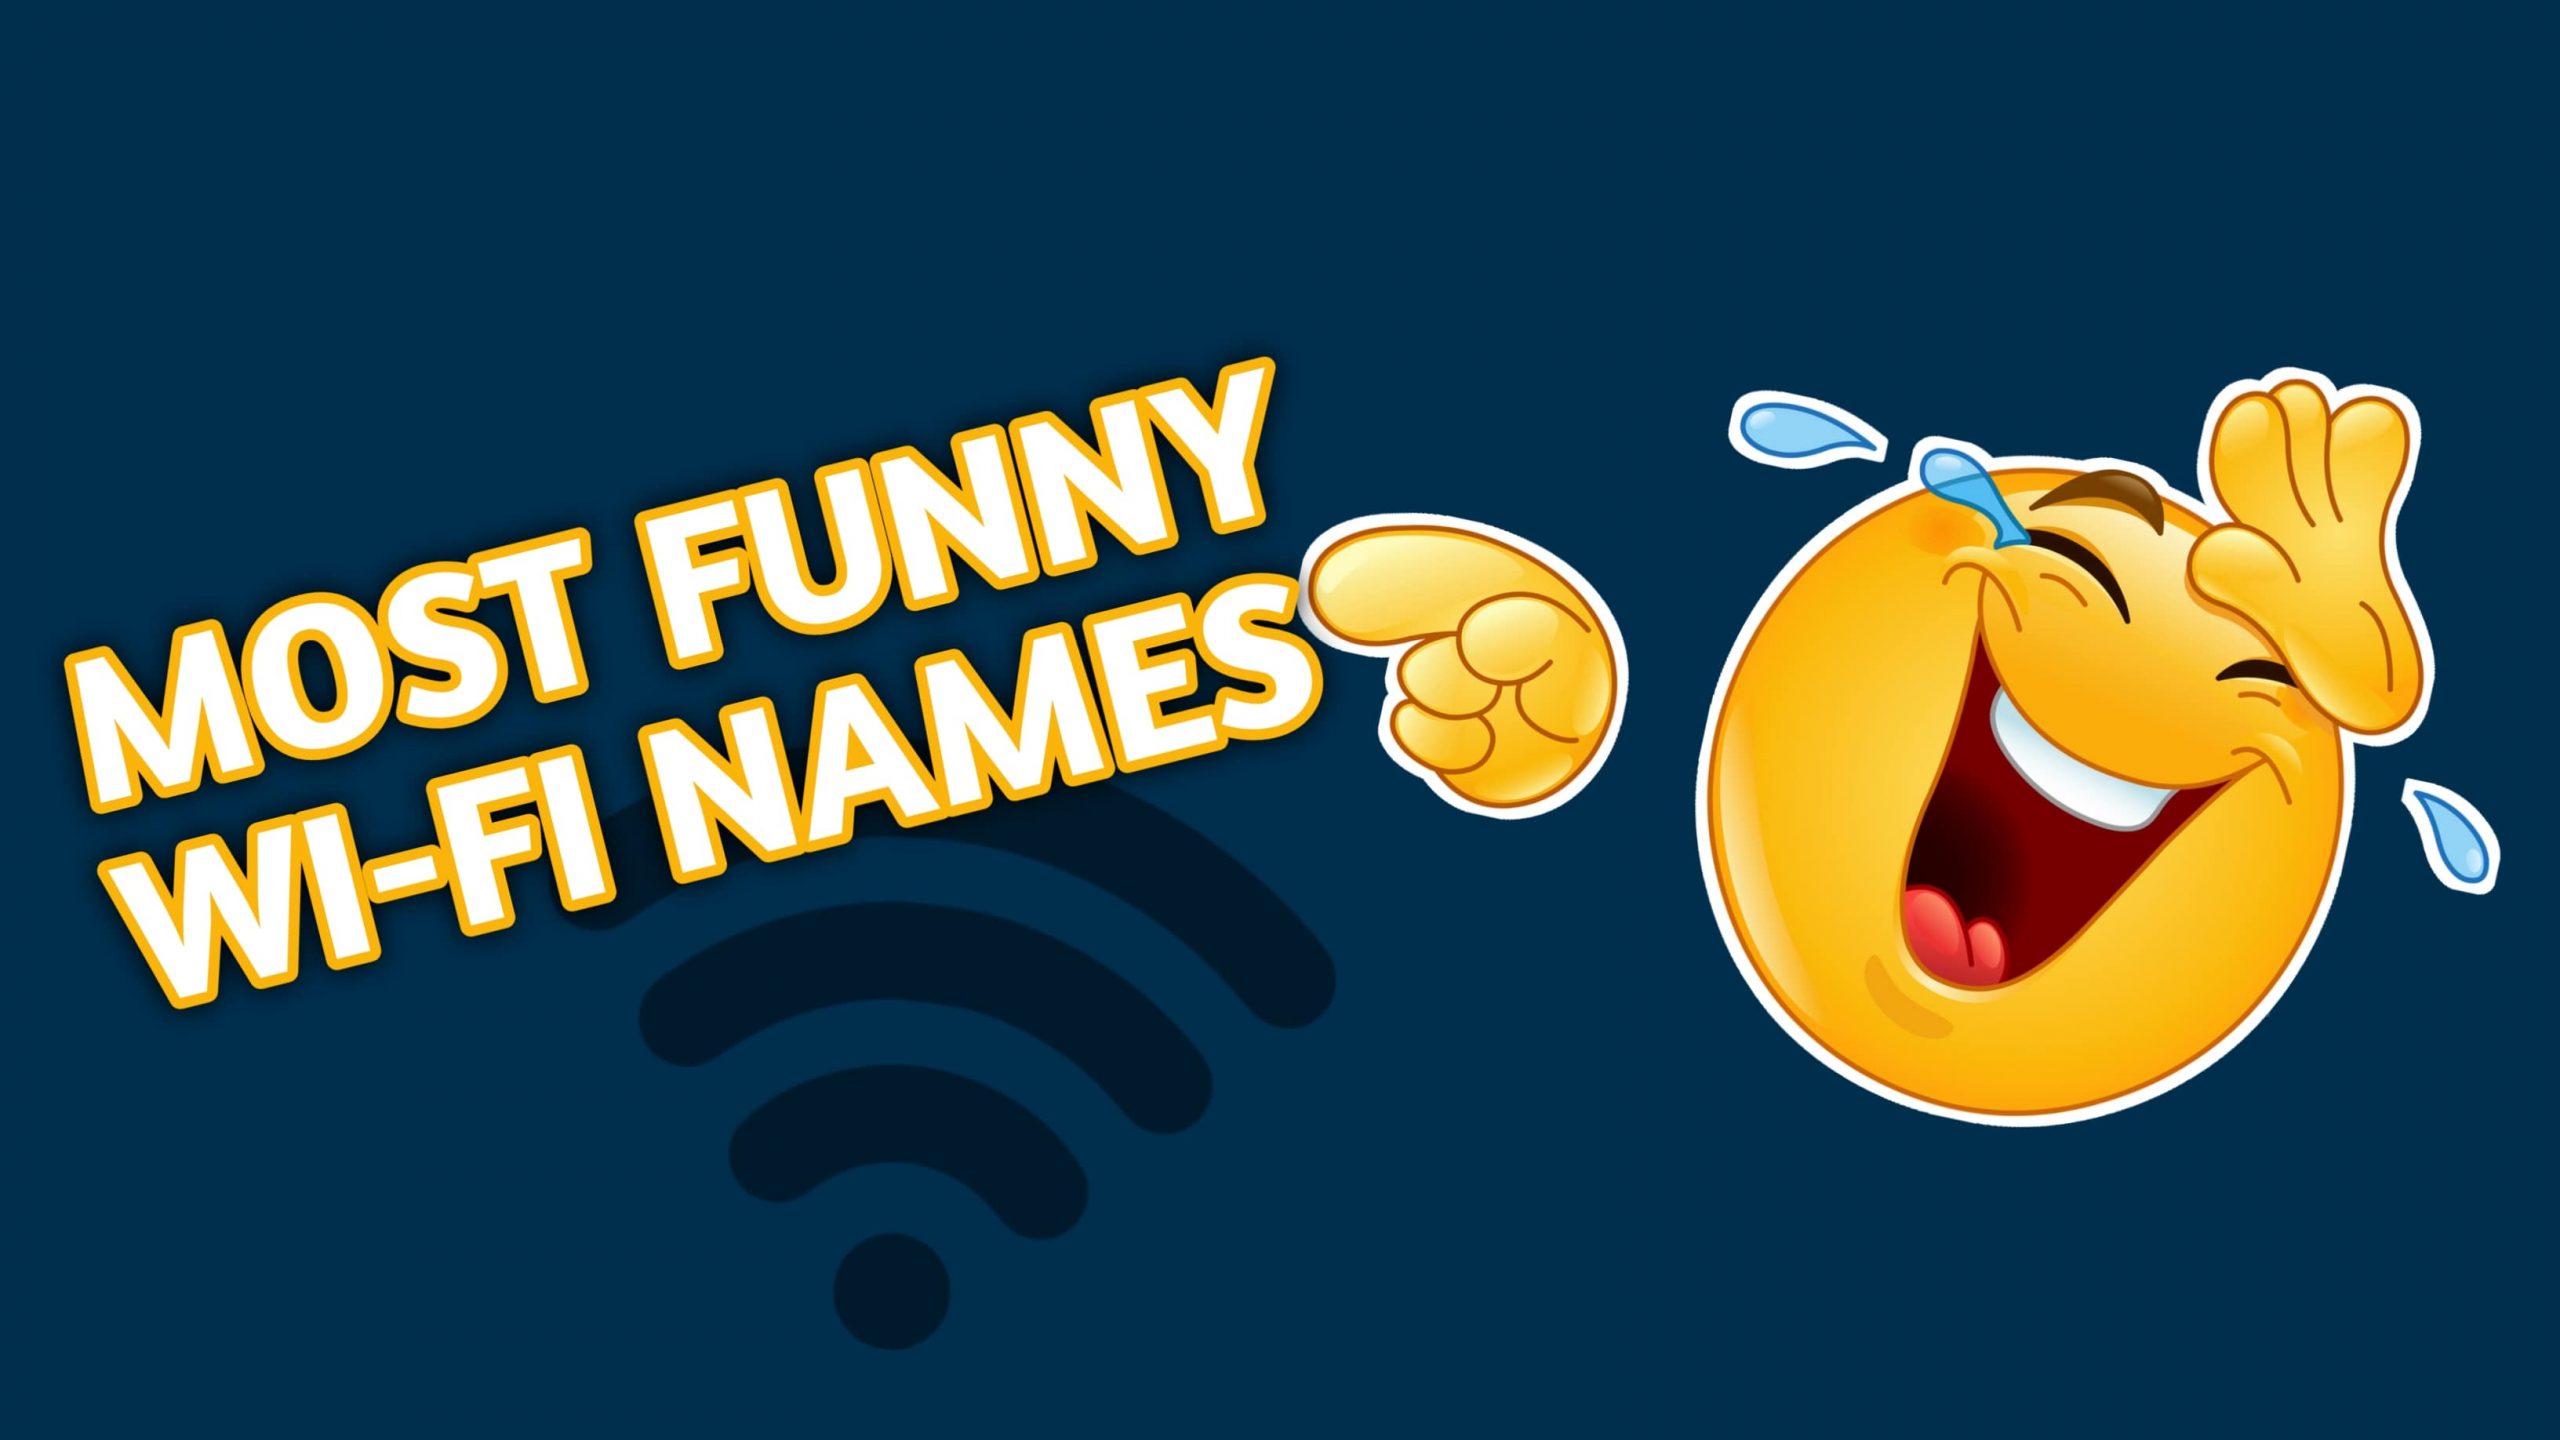 150+ Best Funny And Cool Wifi Names For 2022 - 2023